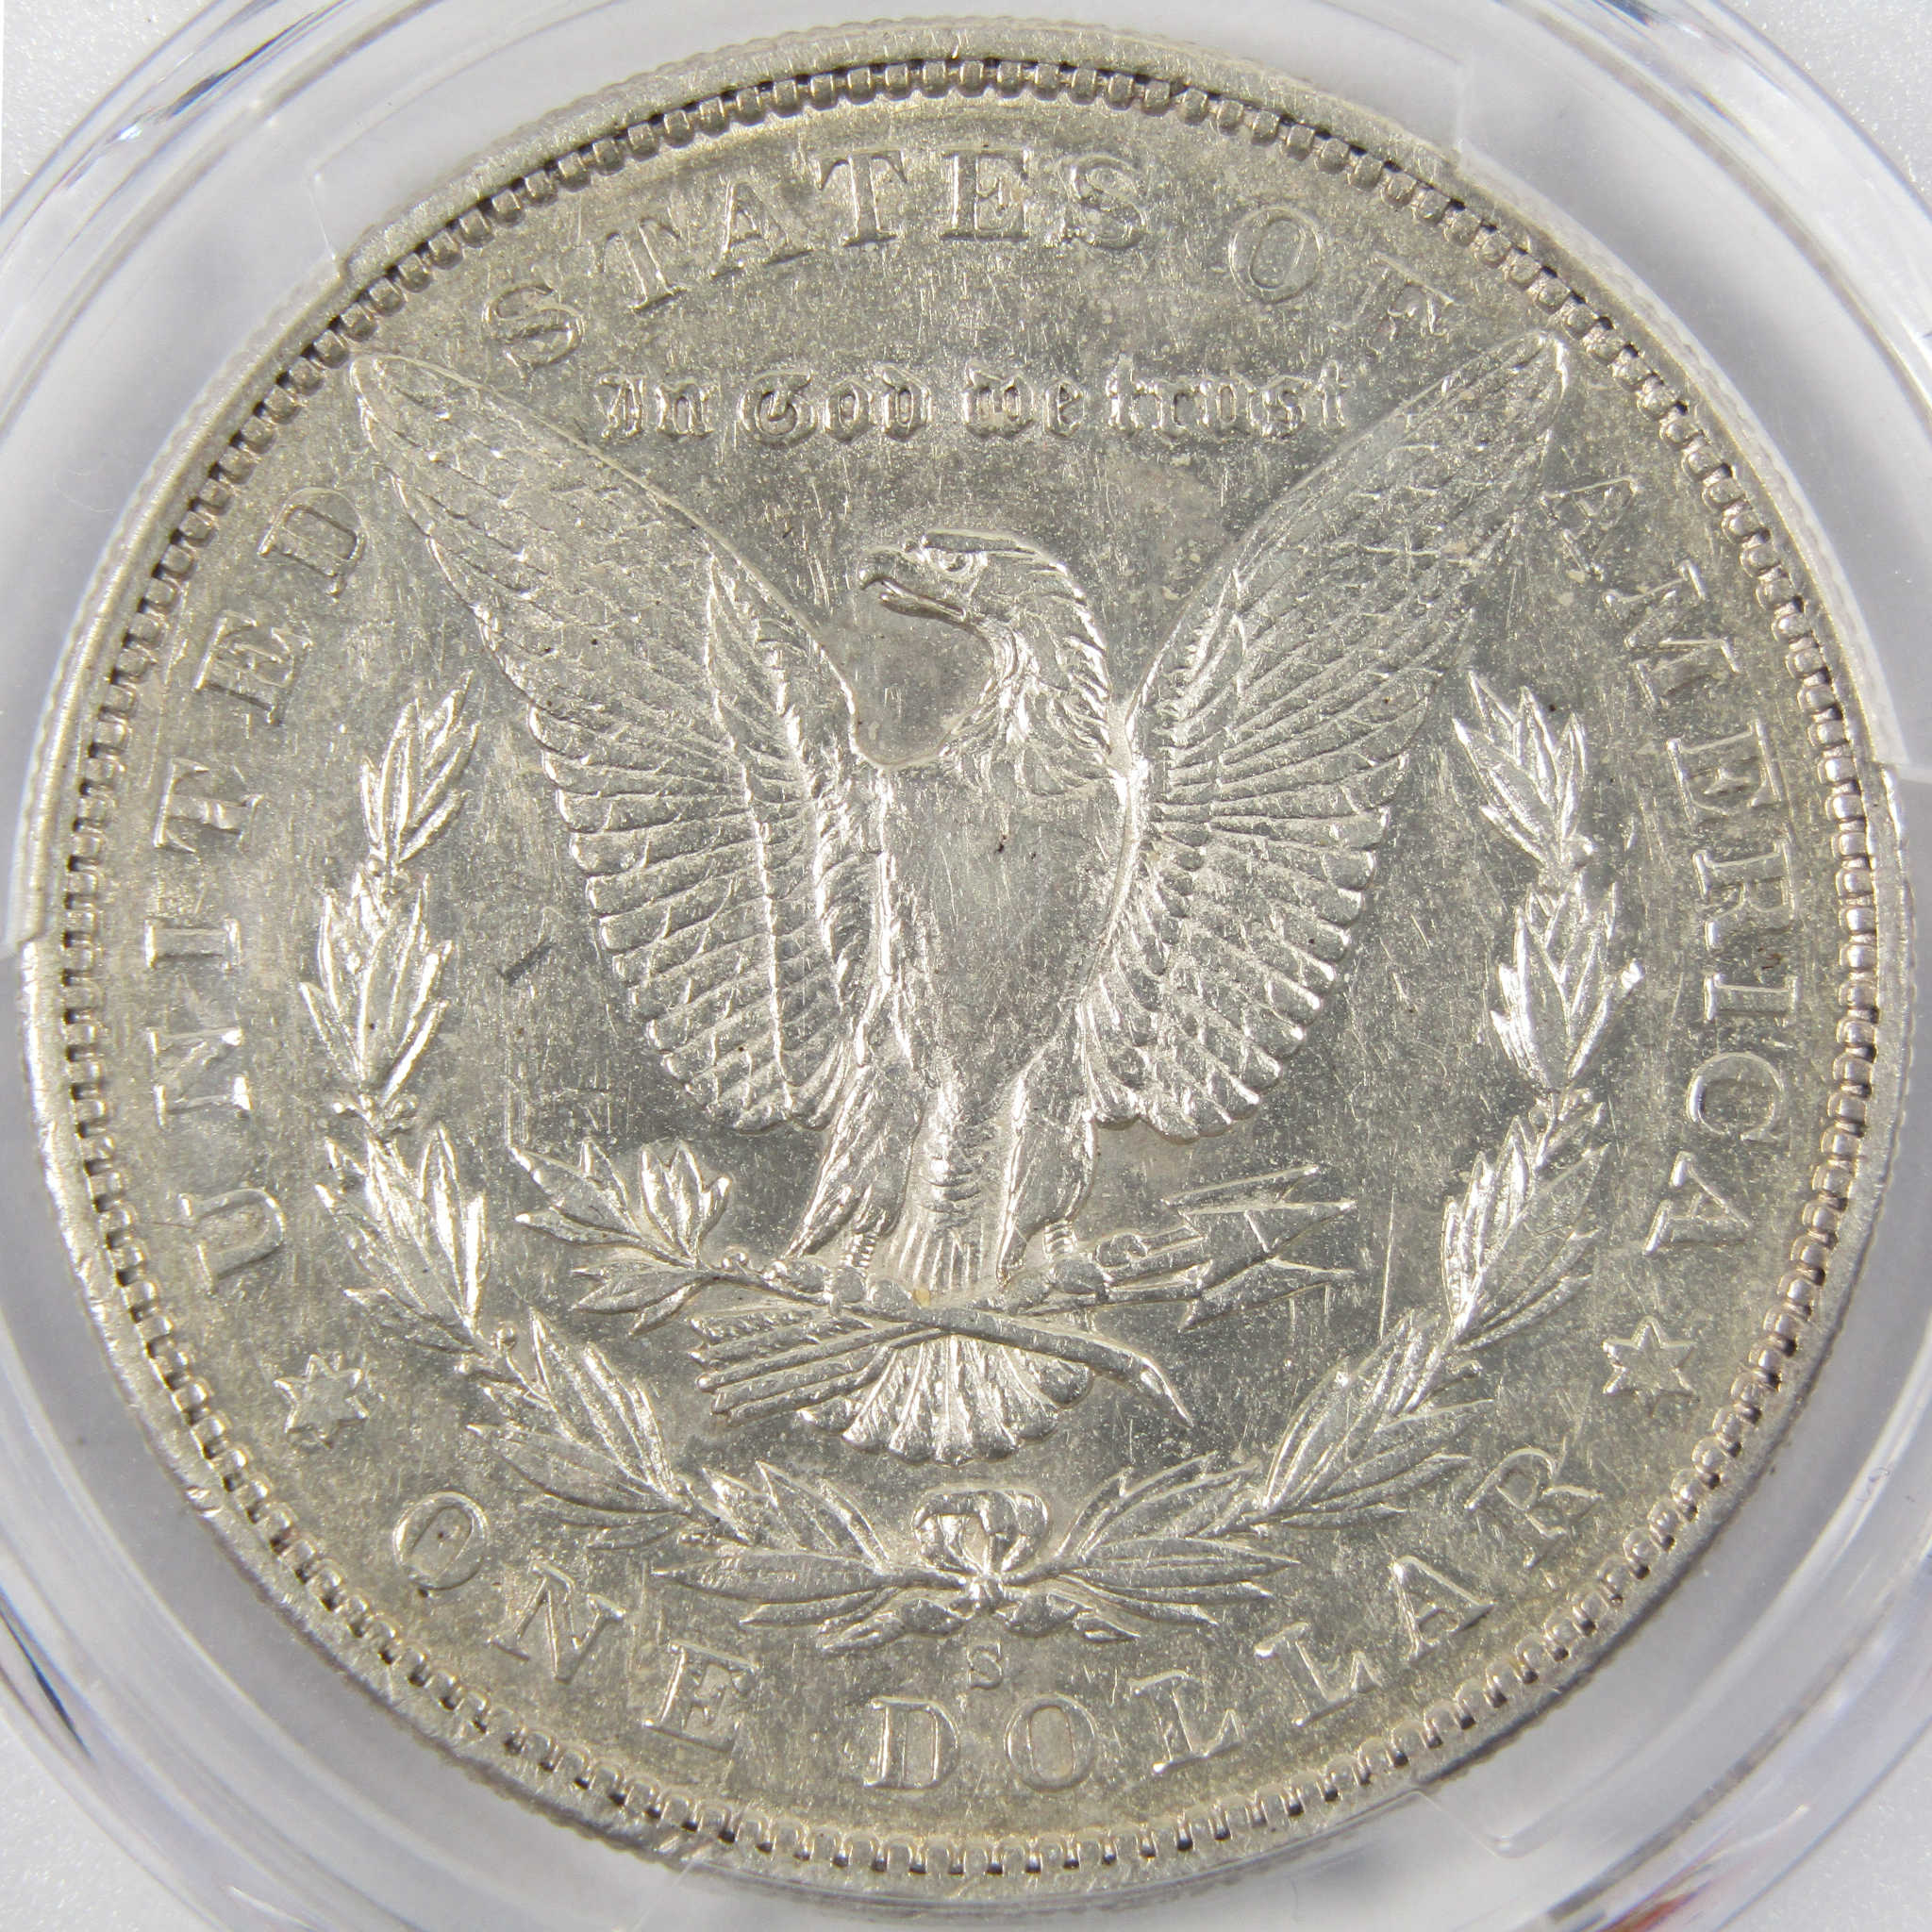 1892 S Morgan Dollar XF Details PCGS 90% Silver $1 Coin SKU:I9740 - Morgan coin - Morgan silver dollar - Morgan silver dollar for sale - Profile Coins &amp; Collectibles